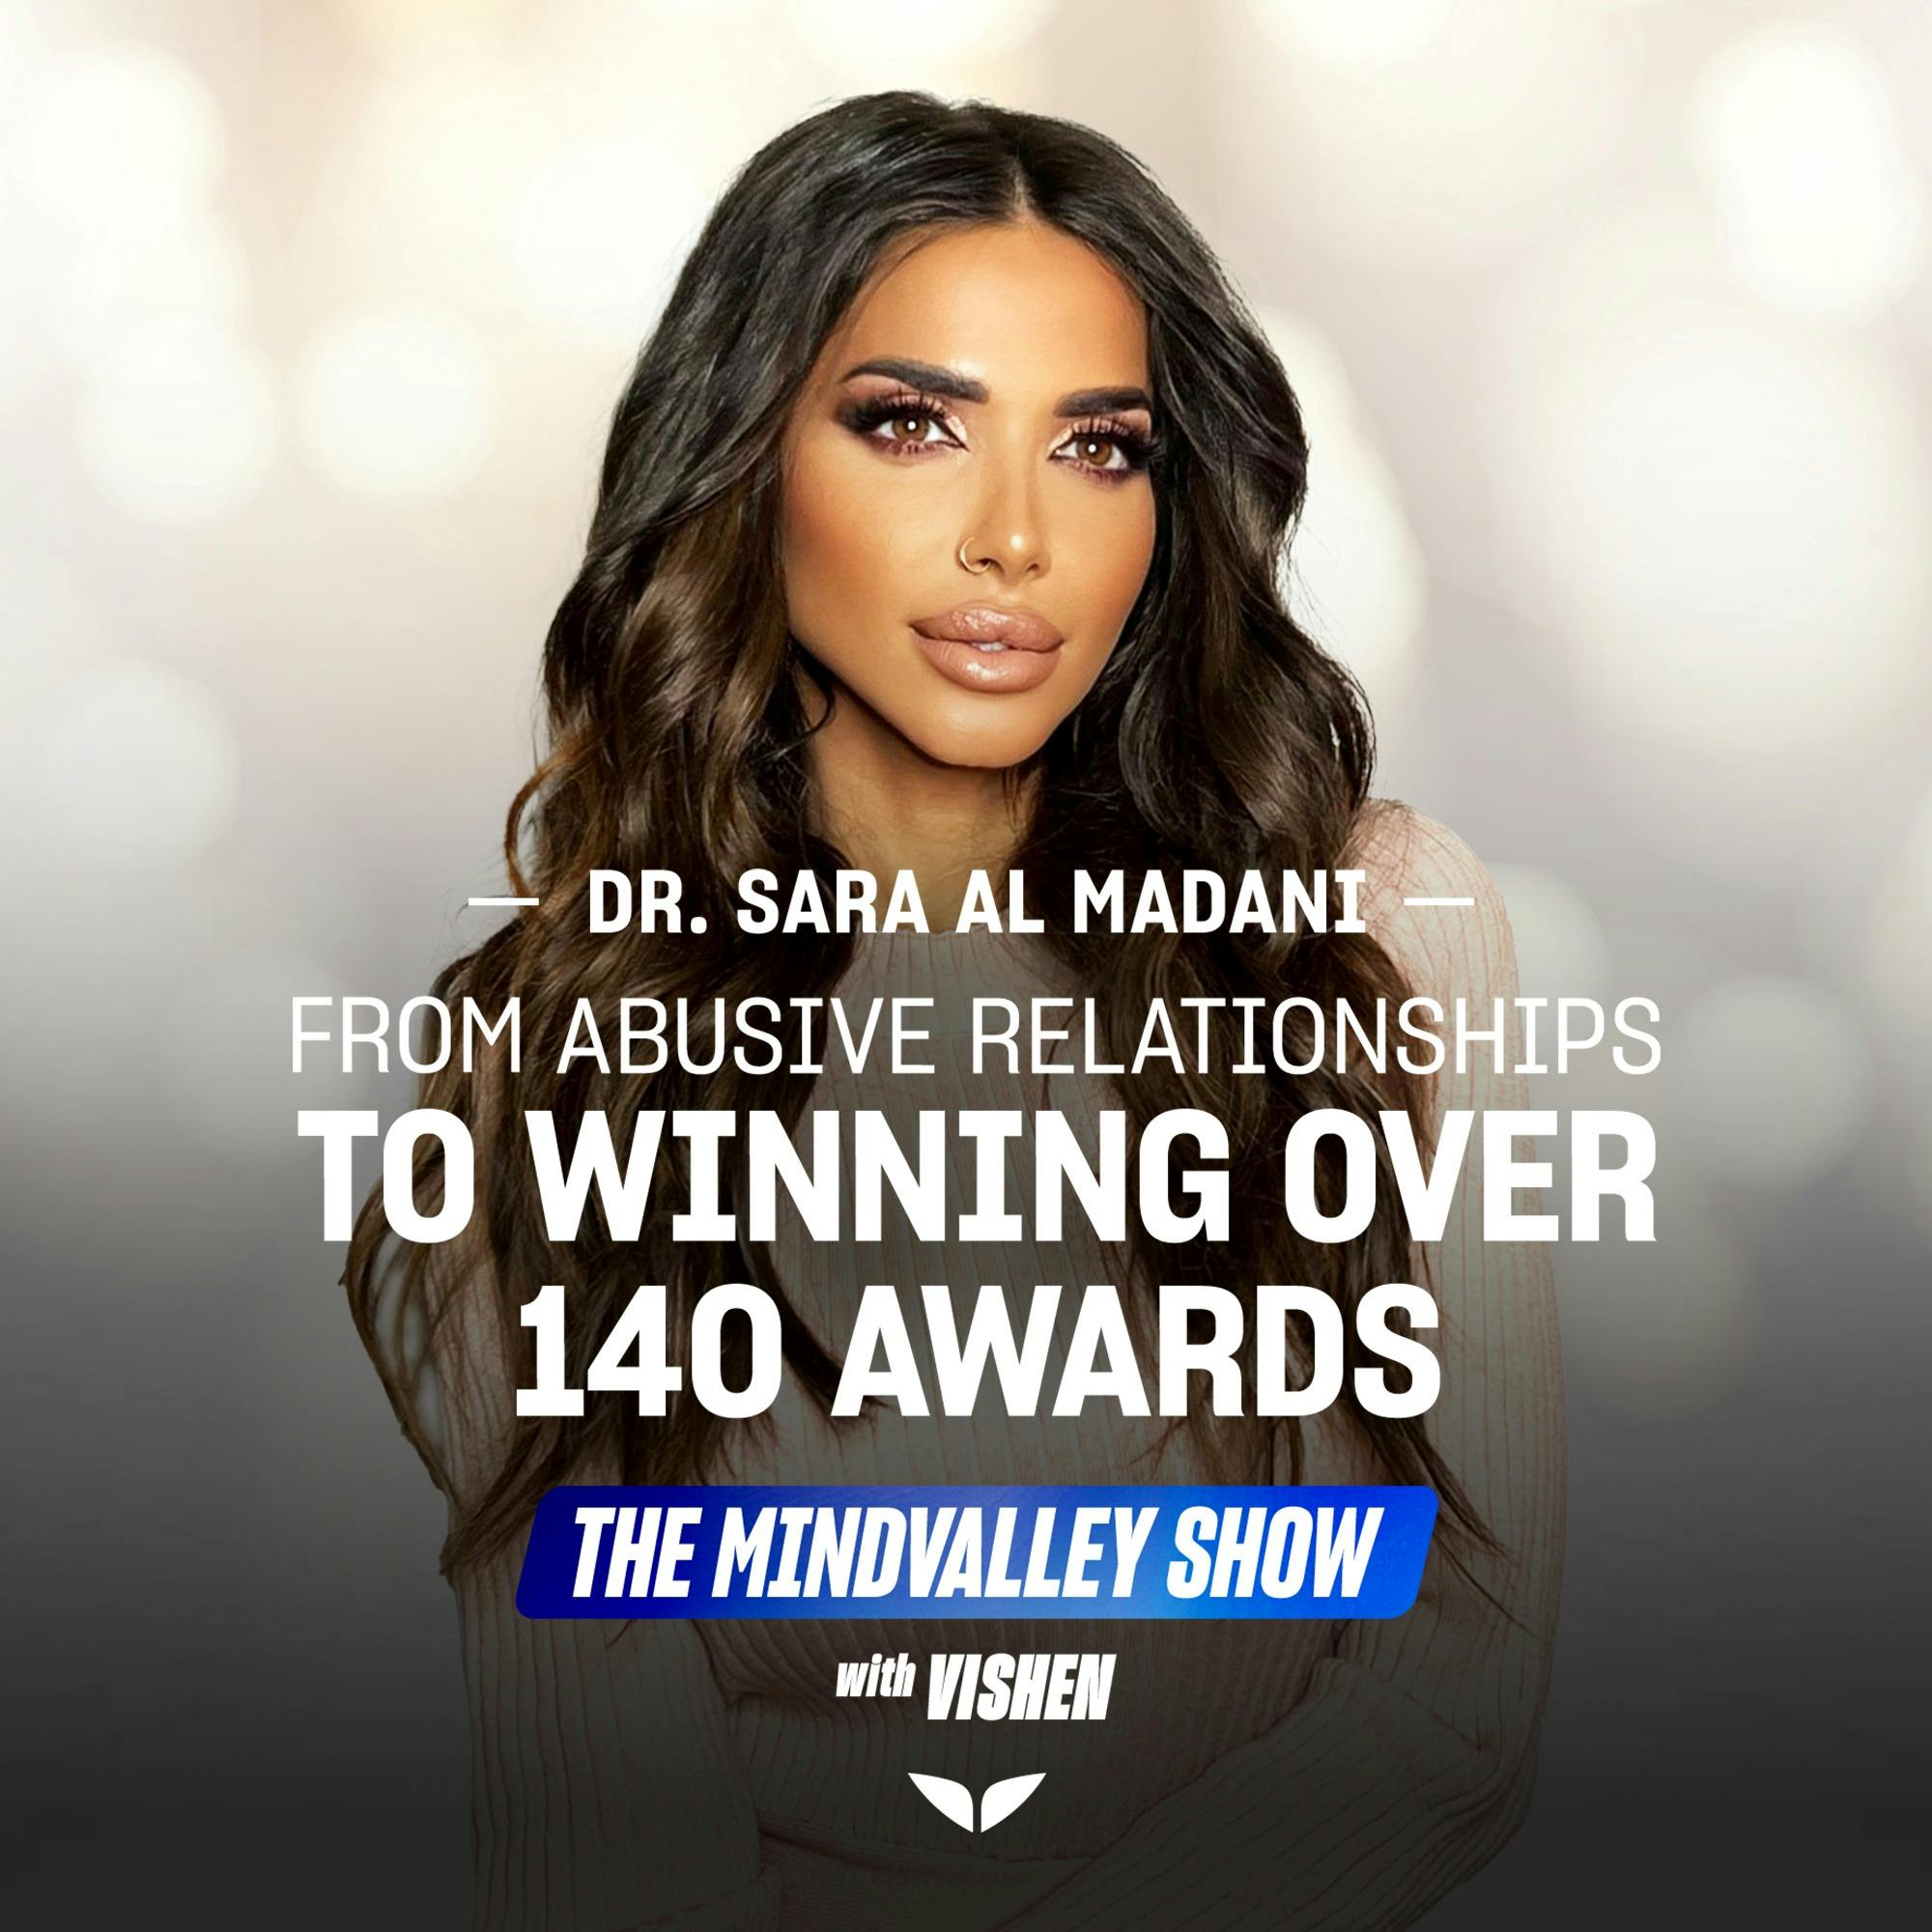 Meet Dr. Sara Al Madani: From Abusive Relationships to Winning Over 140 Awards